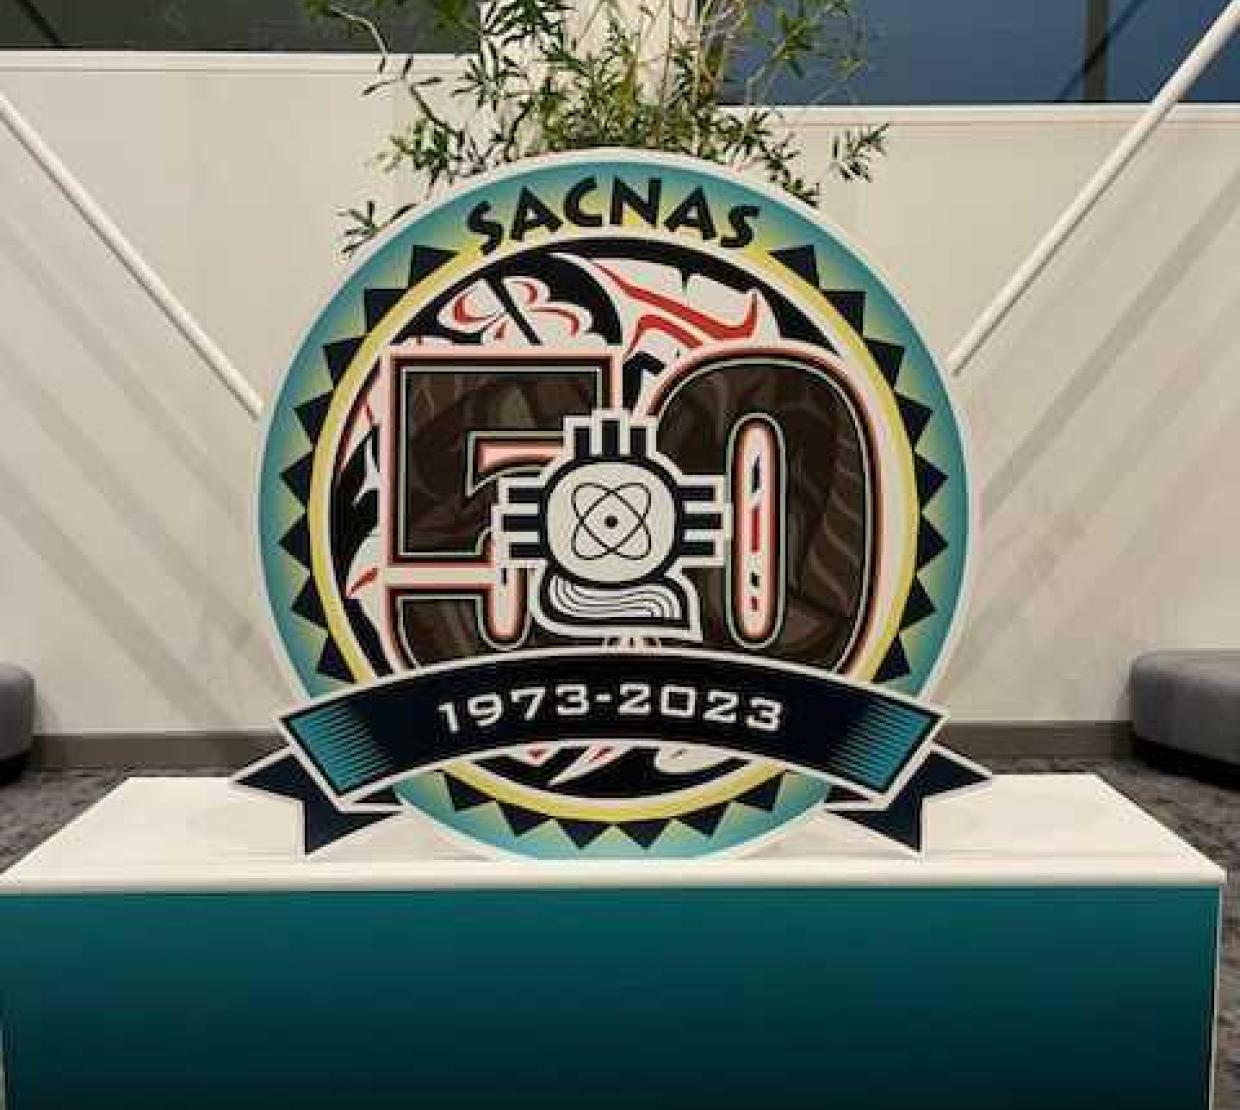 A turquoise podium with a SACNAS figure showing the years 1973 to 2023.